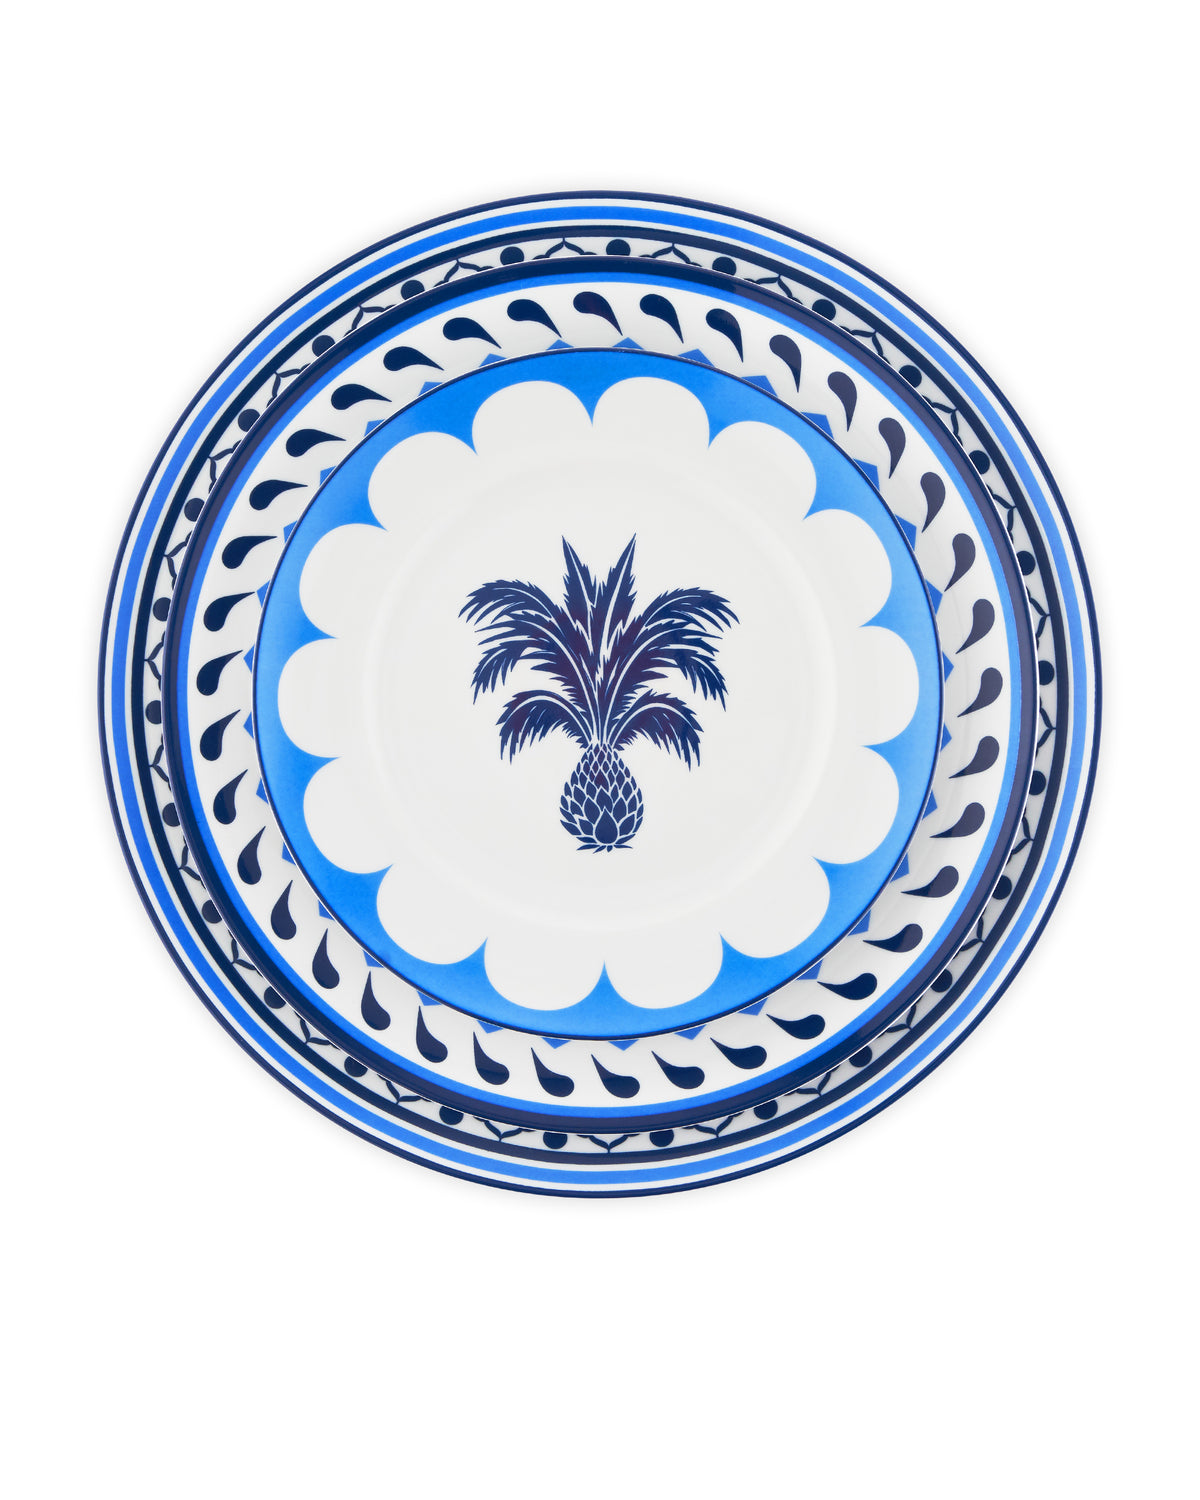 Jaipur Charger Plate